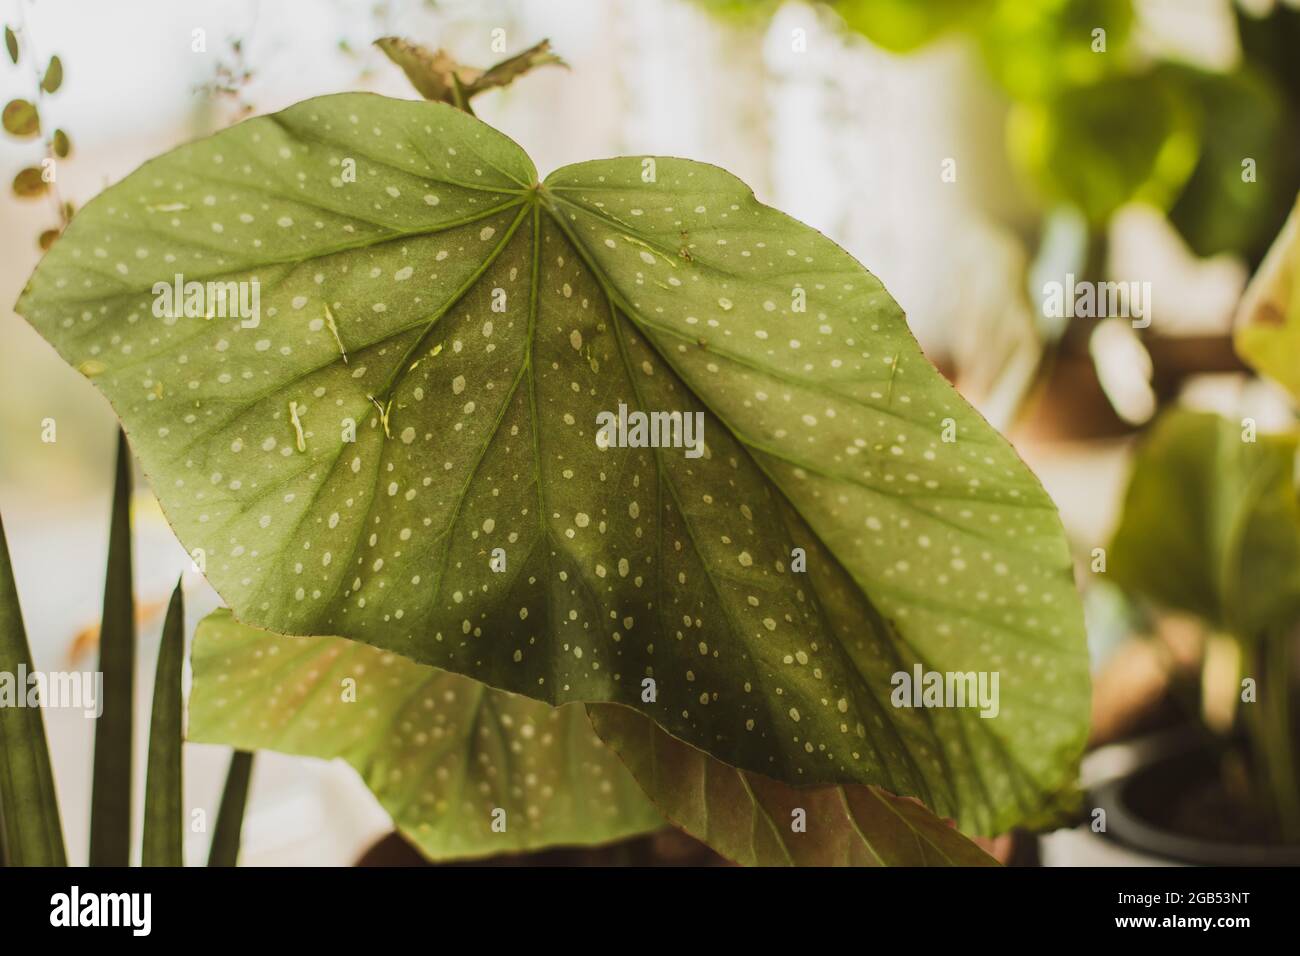 A large green begonia leaf with white spots Stock Photo